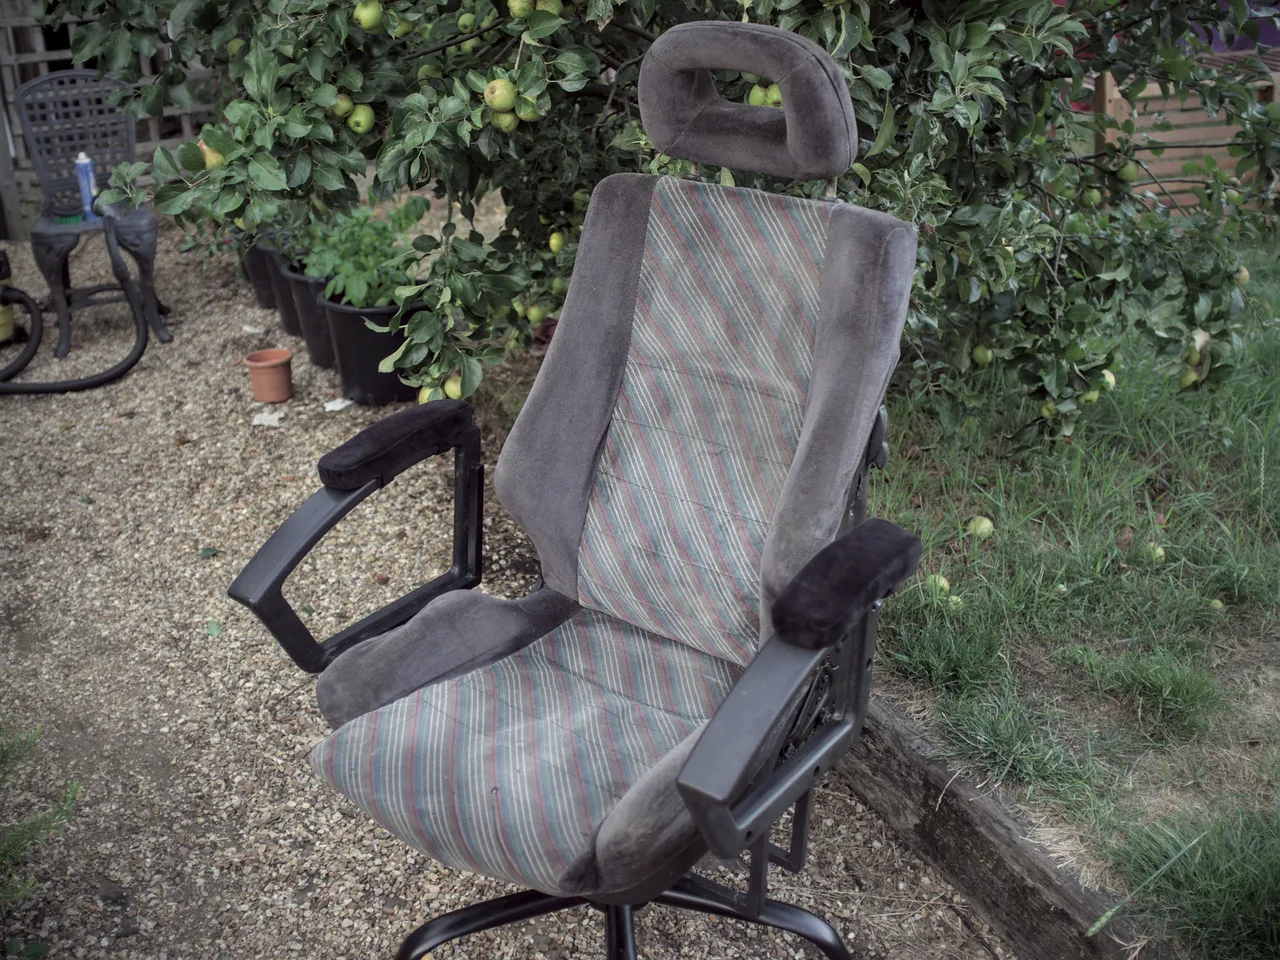 The desk chair, fully reassembled: an Astra GTE seat on a swivel chair base with armrests